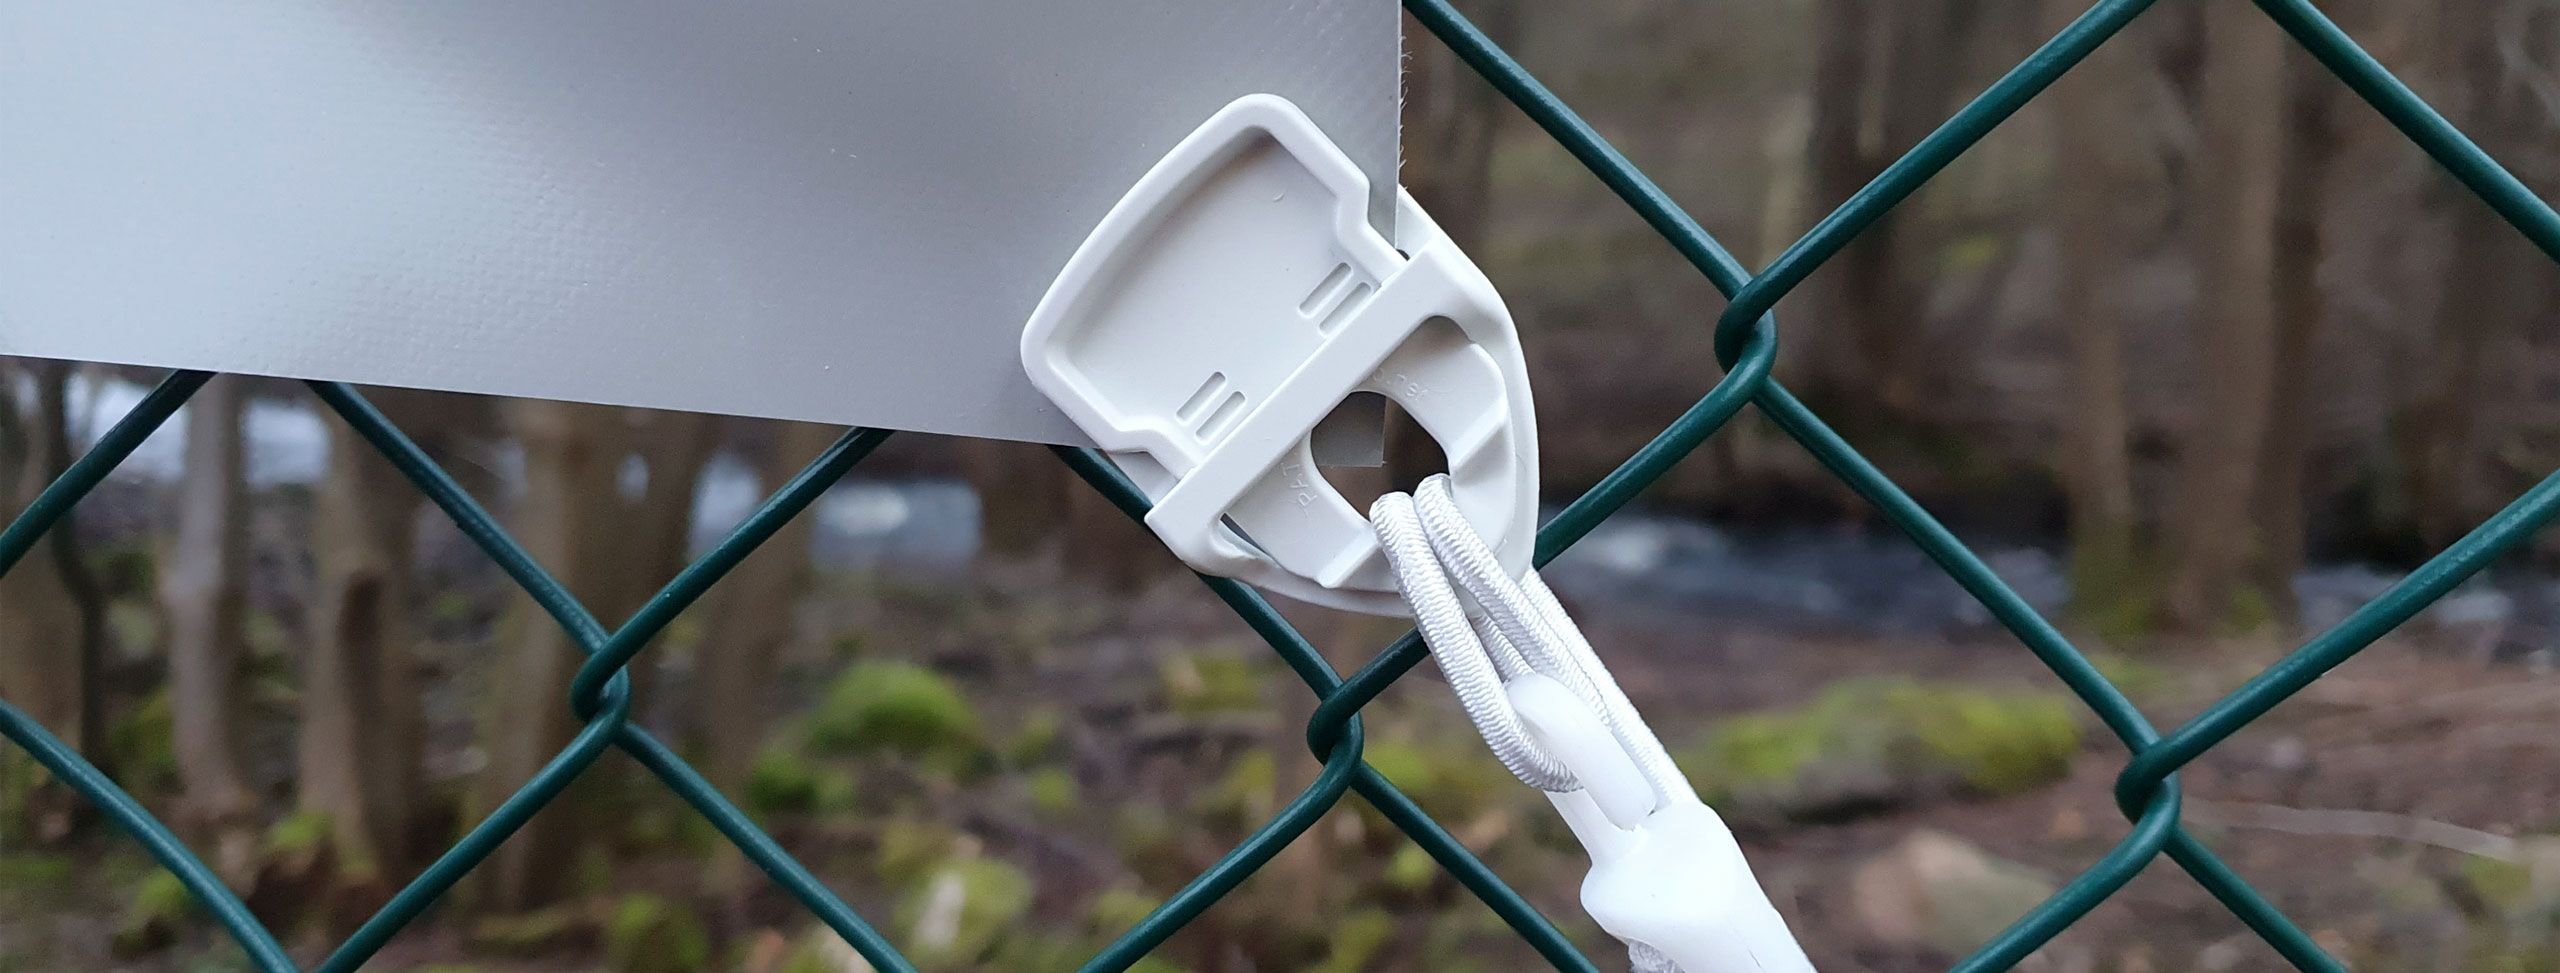 Holdon Xtra Clip, white on fence with bungee